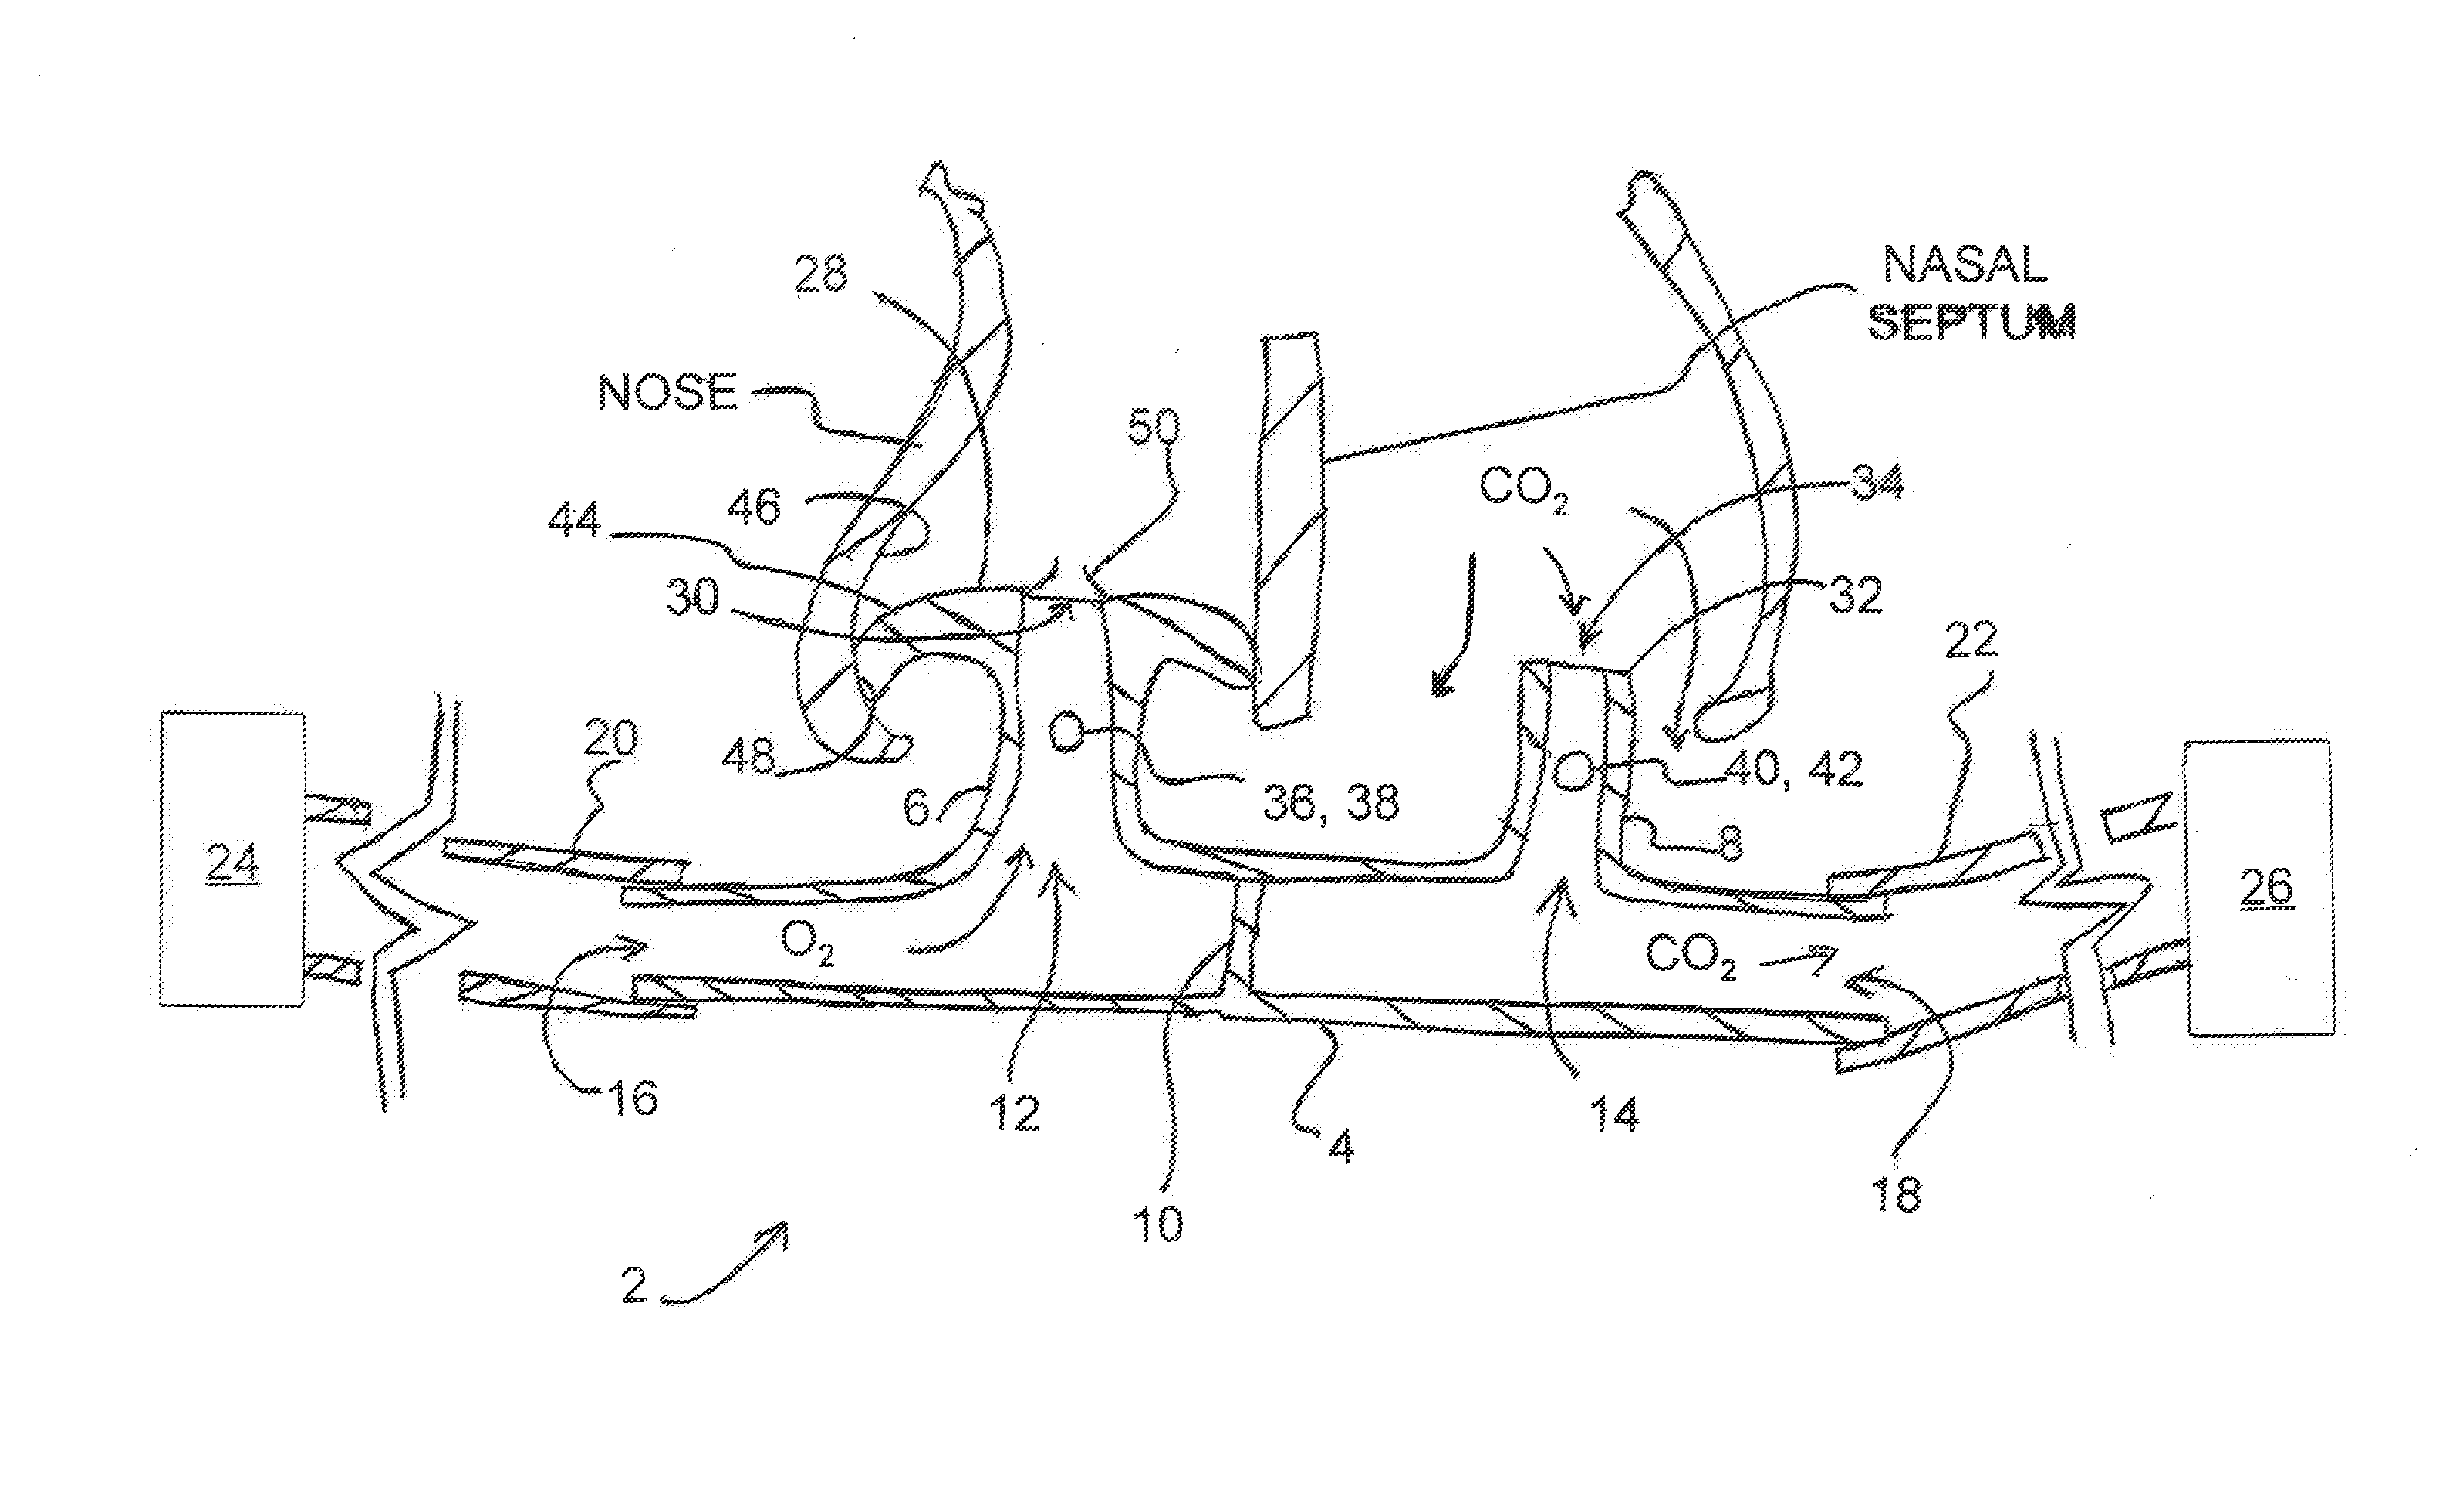 Method and system with divided cannula having low oxygen flow rate and improved end-tidal co2 measurement